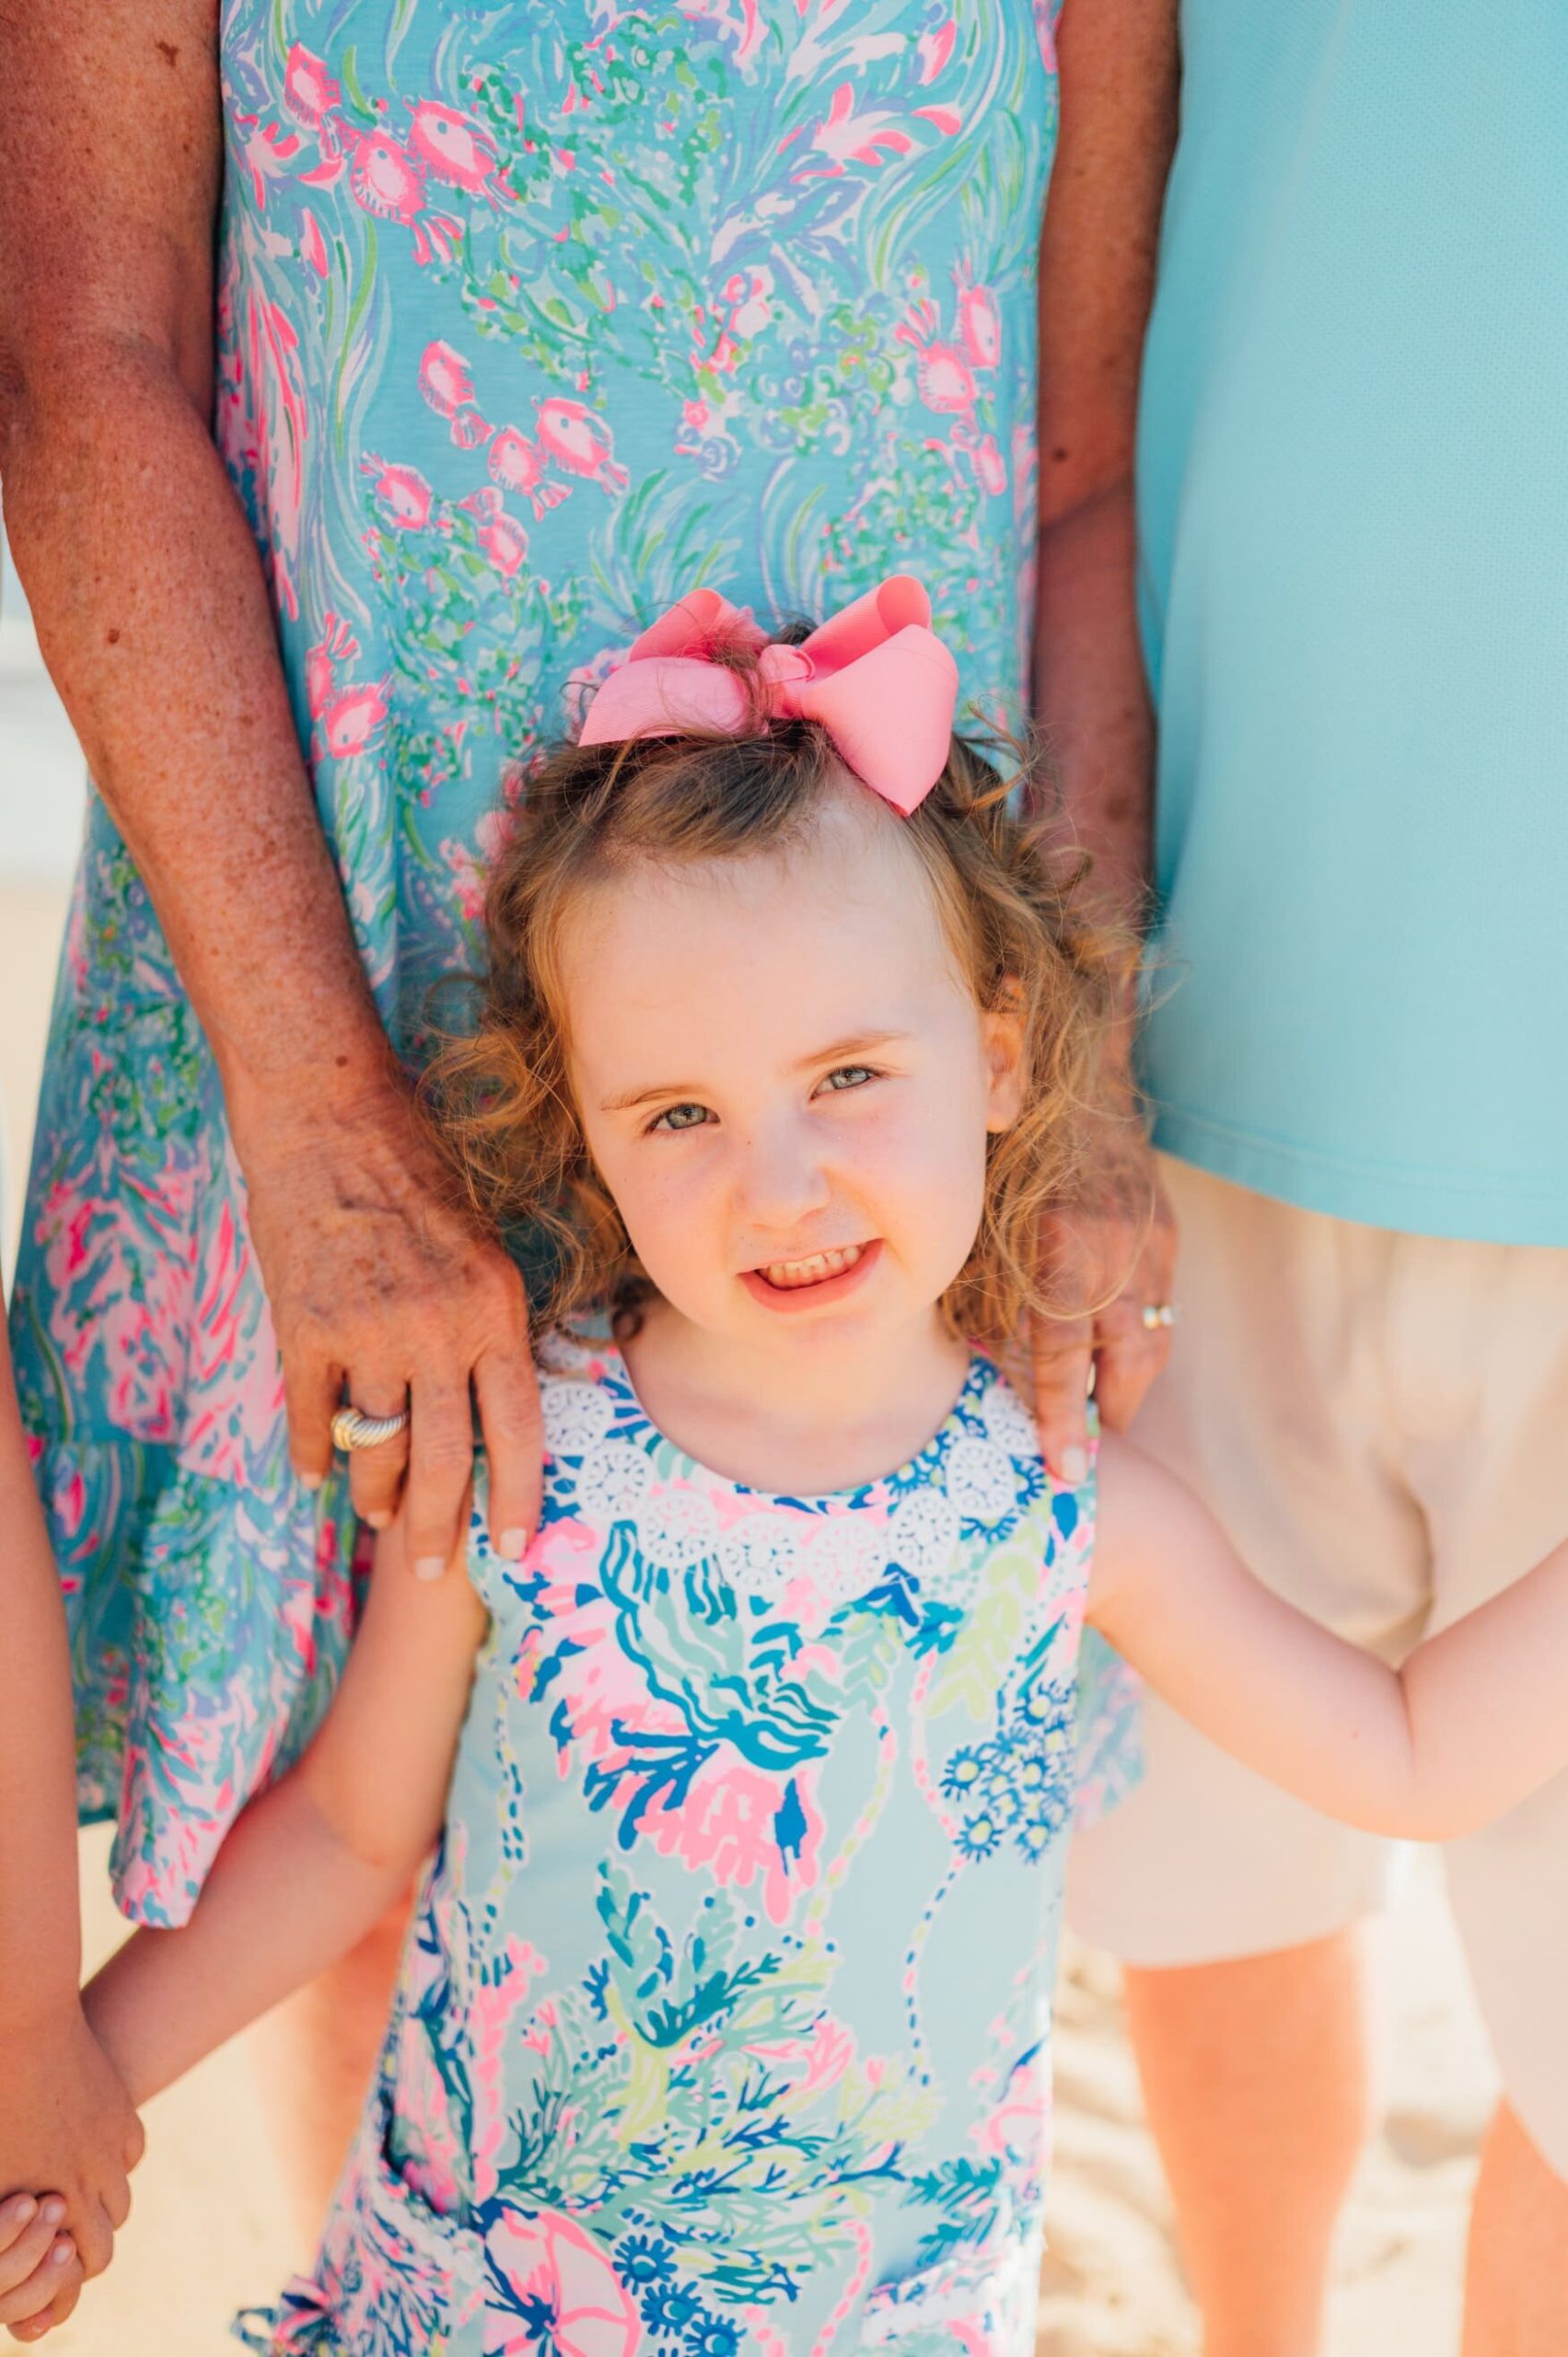 family-photos-outfits-lily-pulitzer-beach-1.jpg